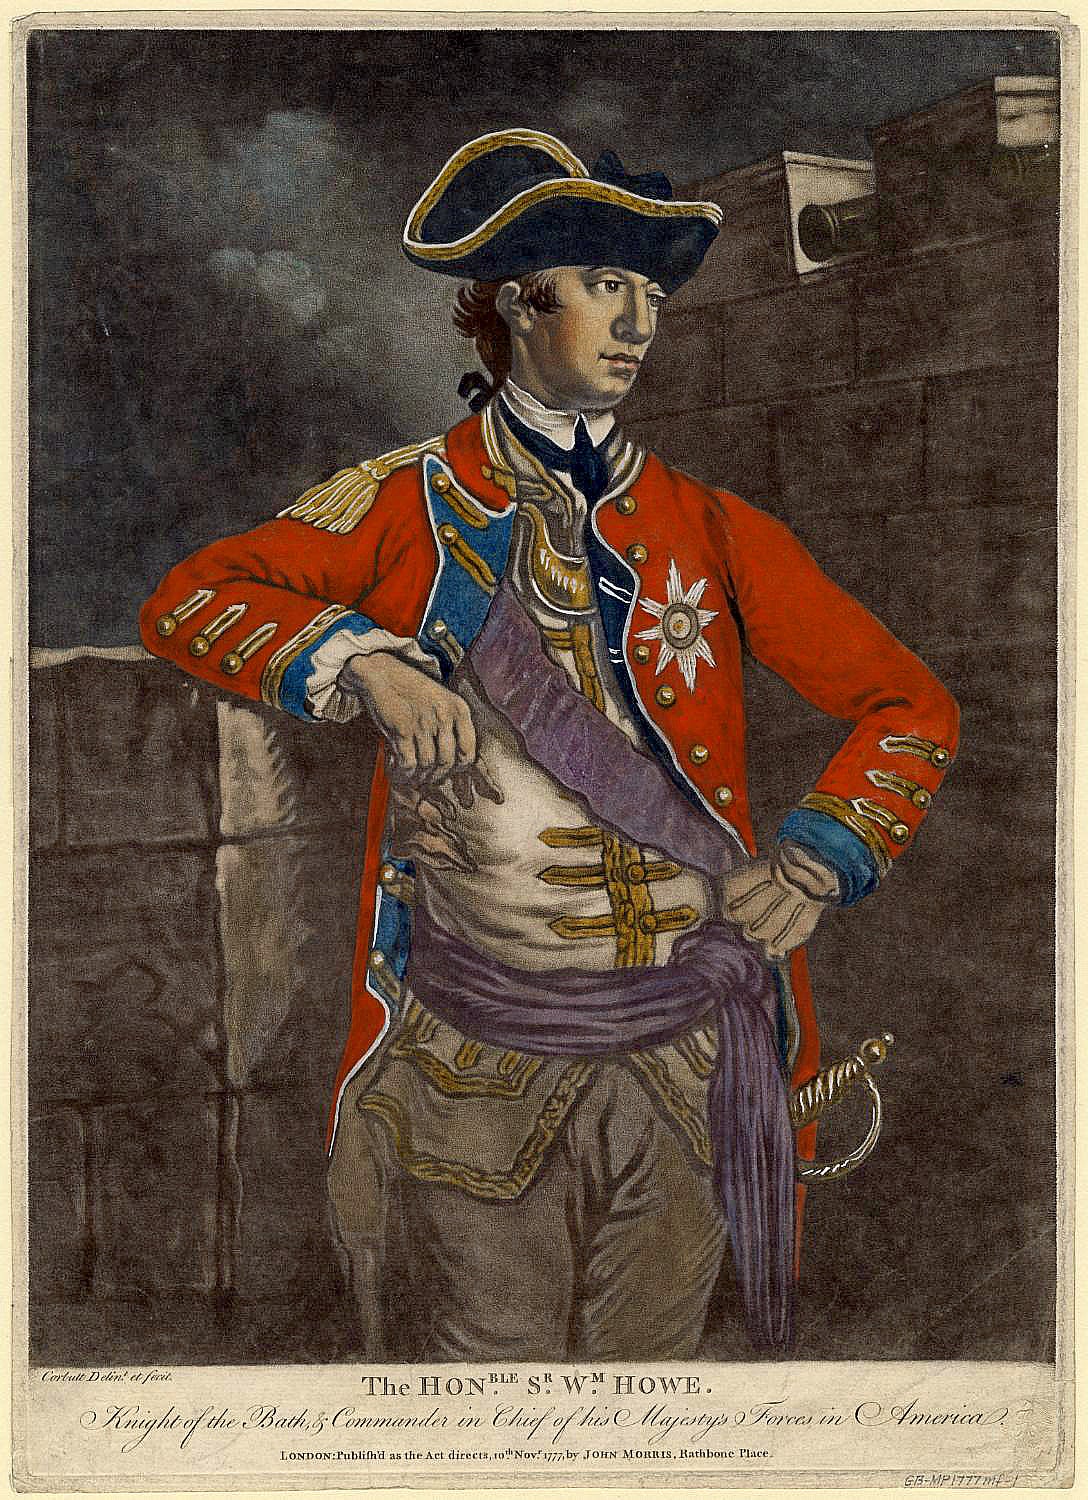 General William Howe, blew up the British plan by chasing Washington. 